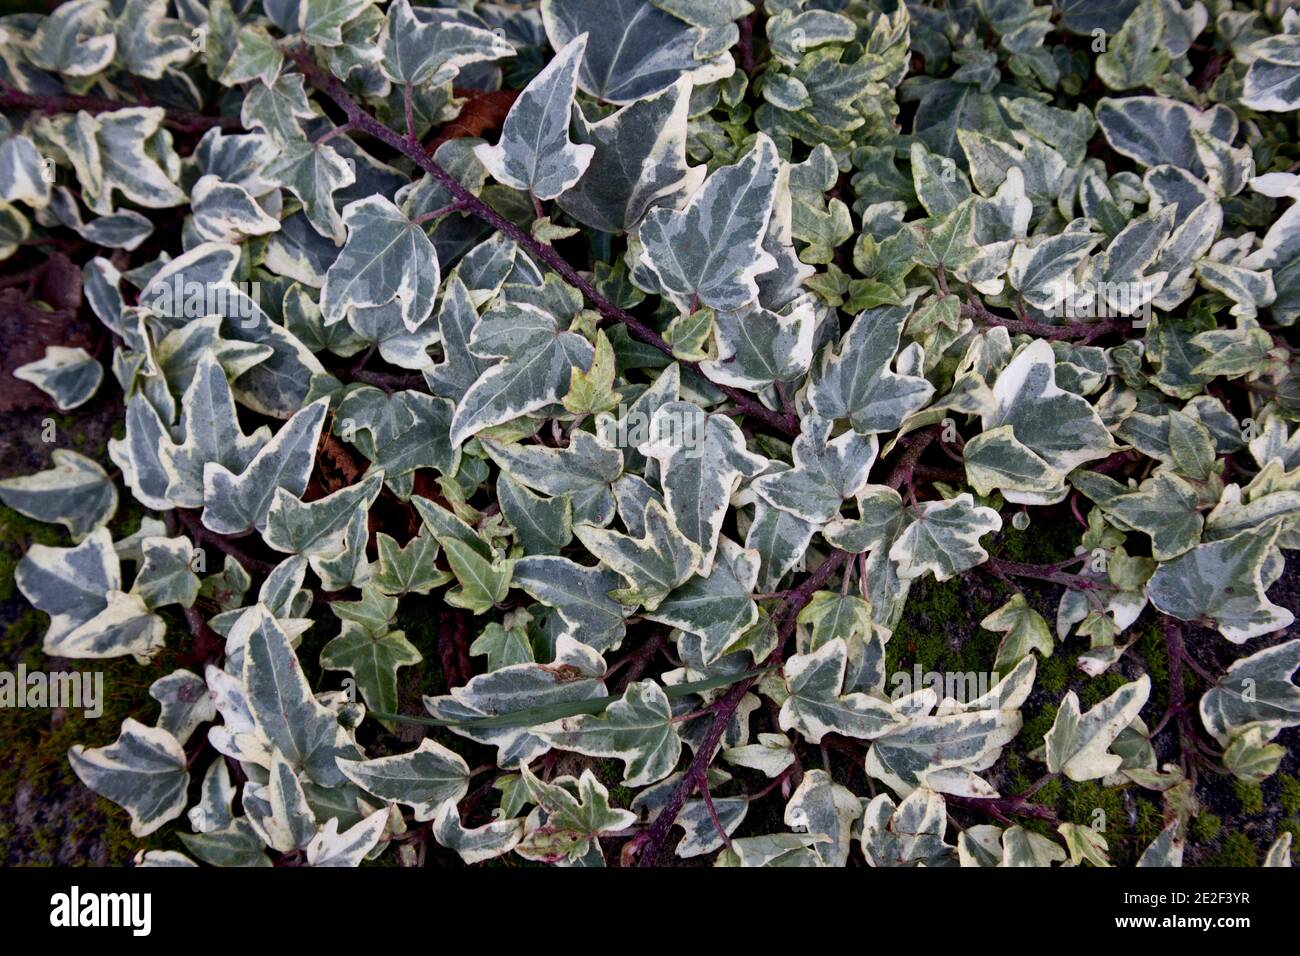 Hedera algeriensis ‘Gloire de Marengo’ Algerian ivy – variegated ivy with pointed central lobe,  January, England, UK Stock Photo